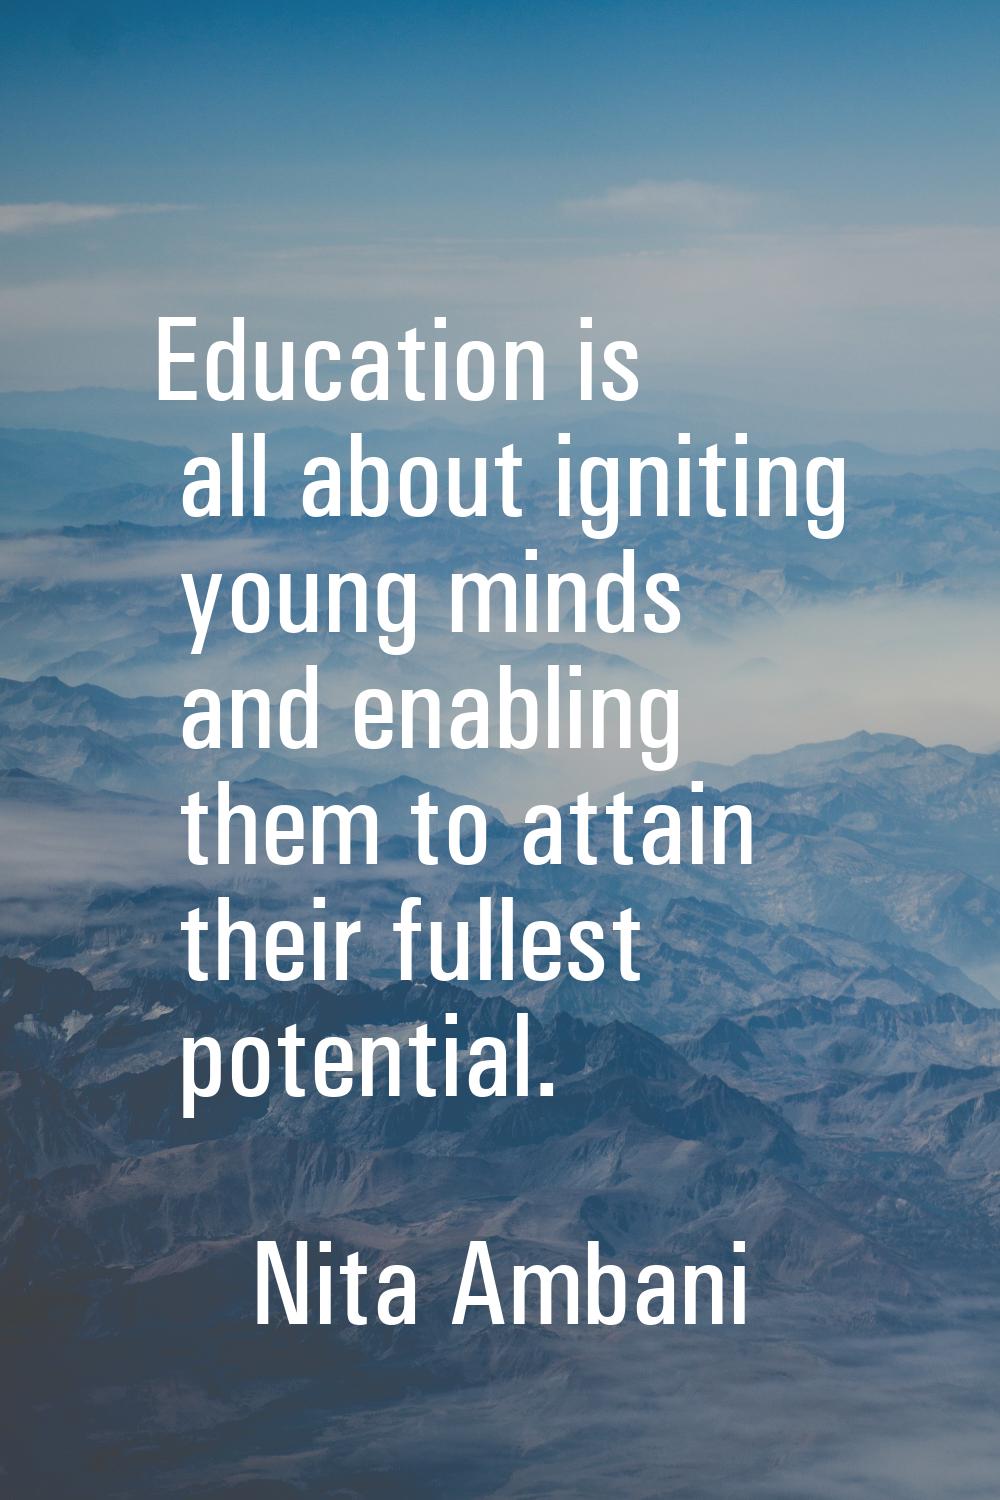 Education is all about igniting young minds and enabling them to attain their fullest potential.